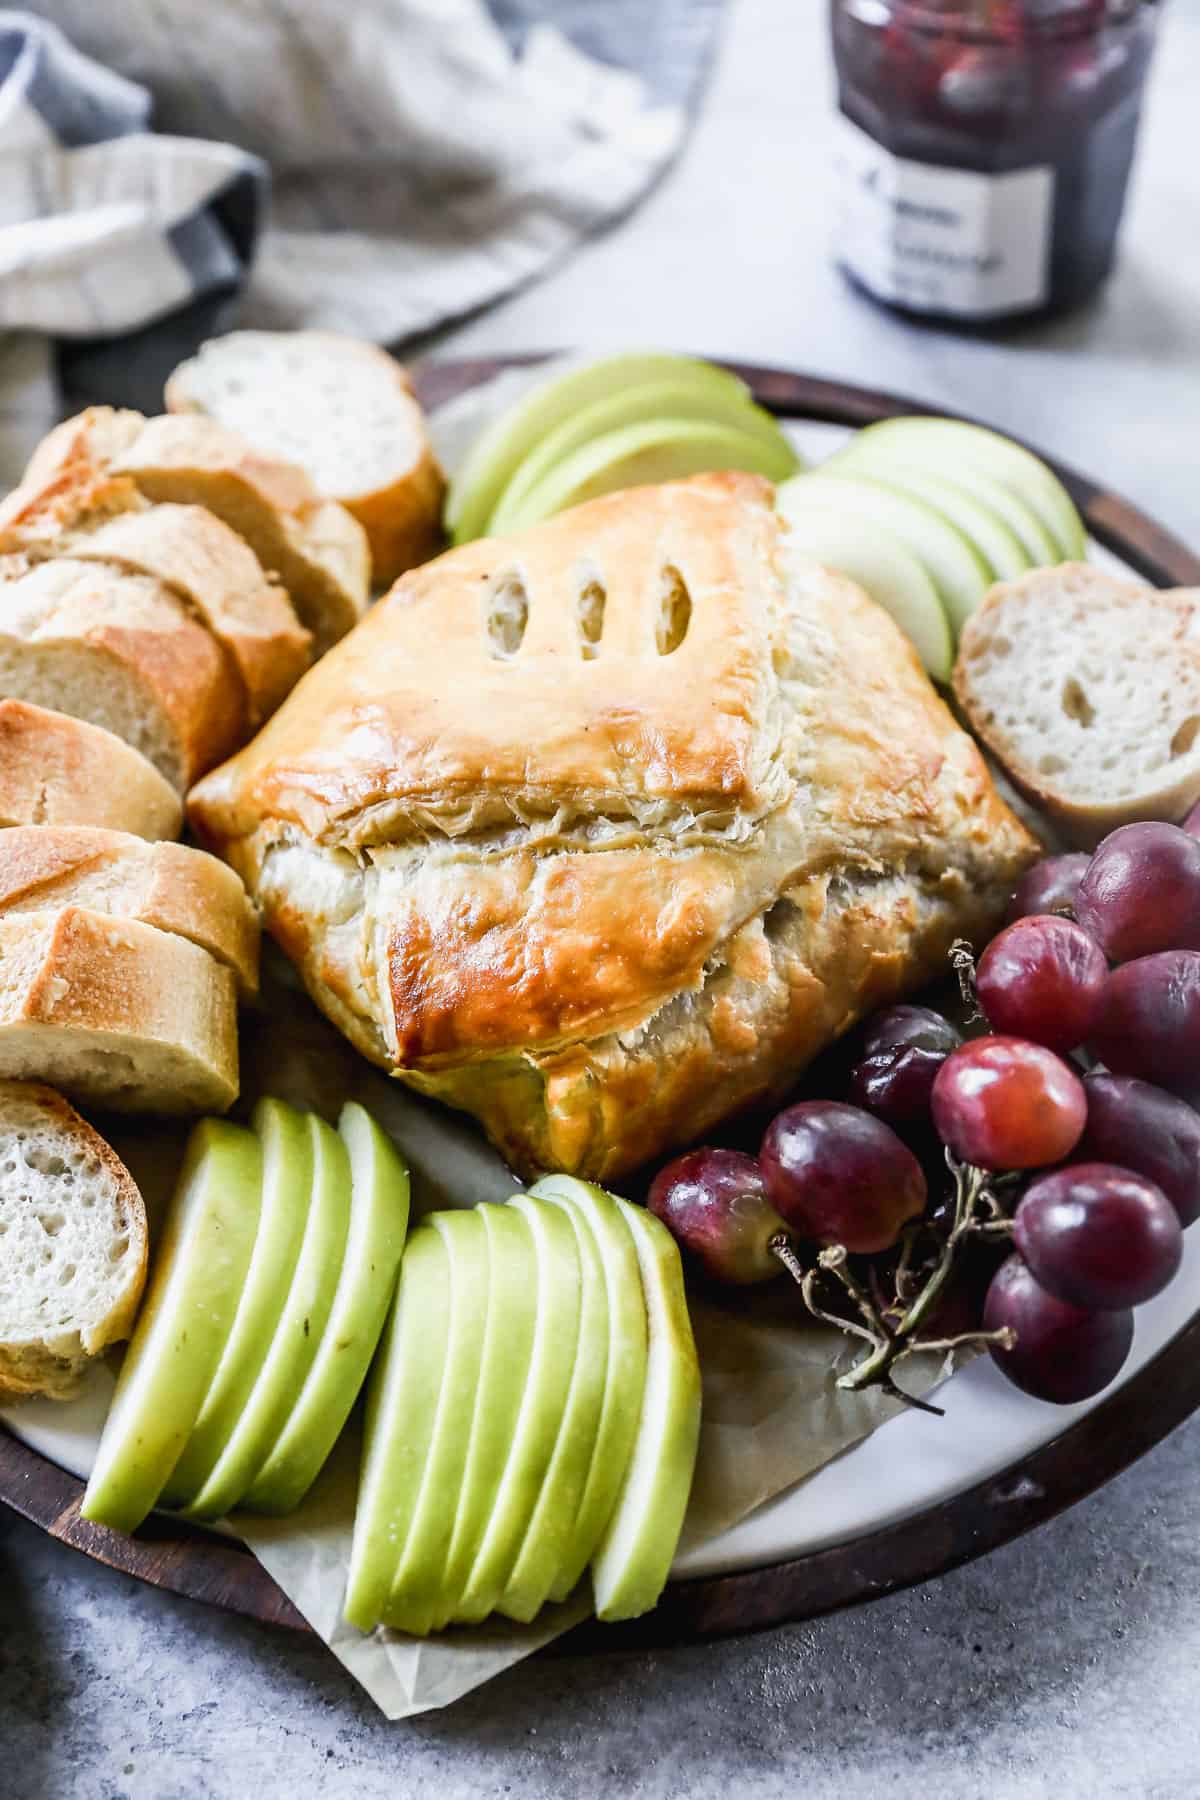 Baked Brie wrapped in a puff pastry on a platter surrounded by grapes, apples, and bread.